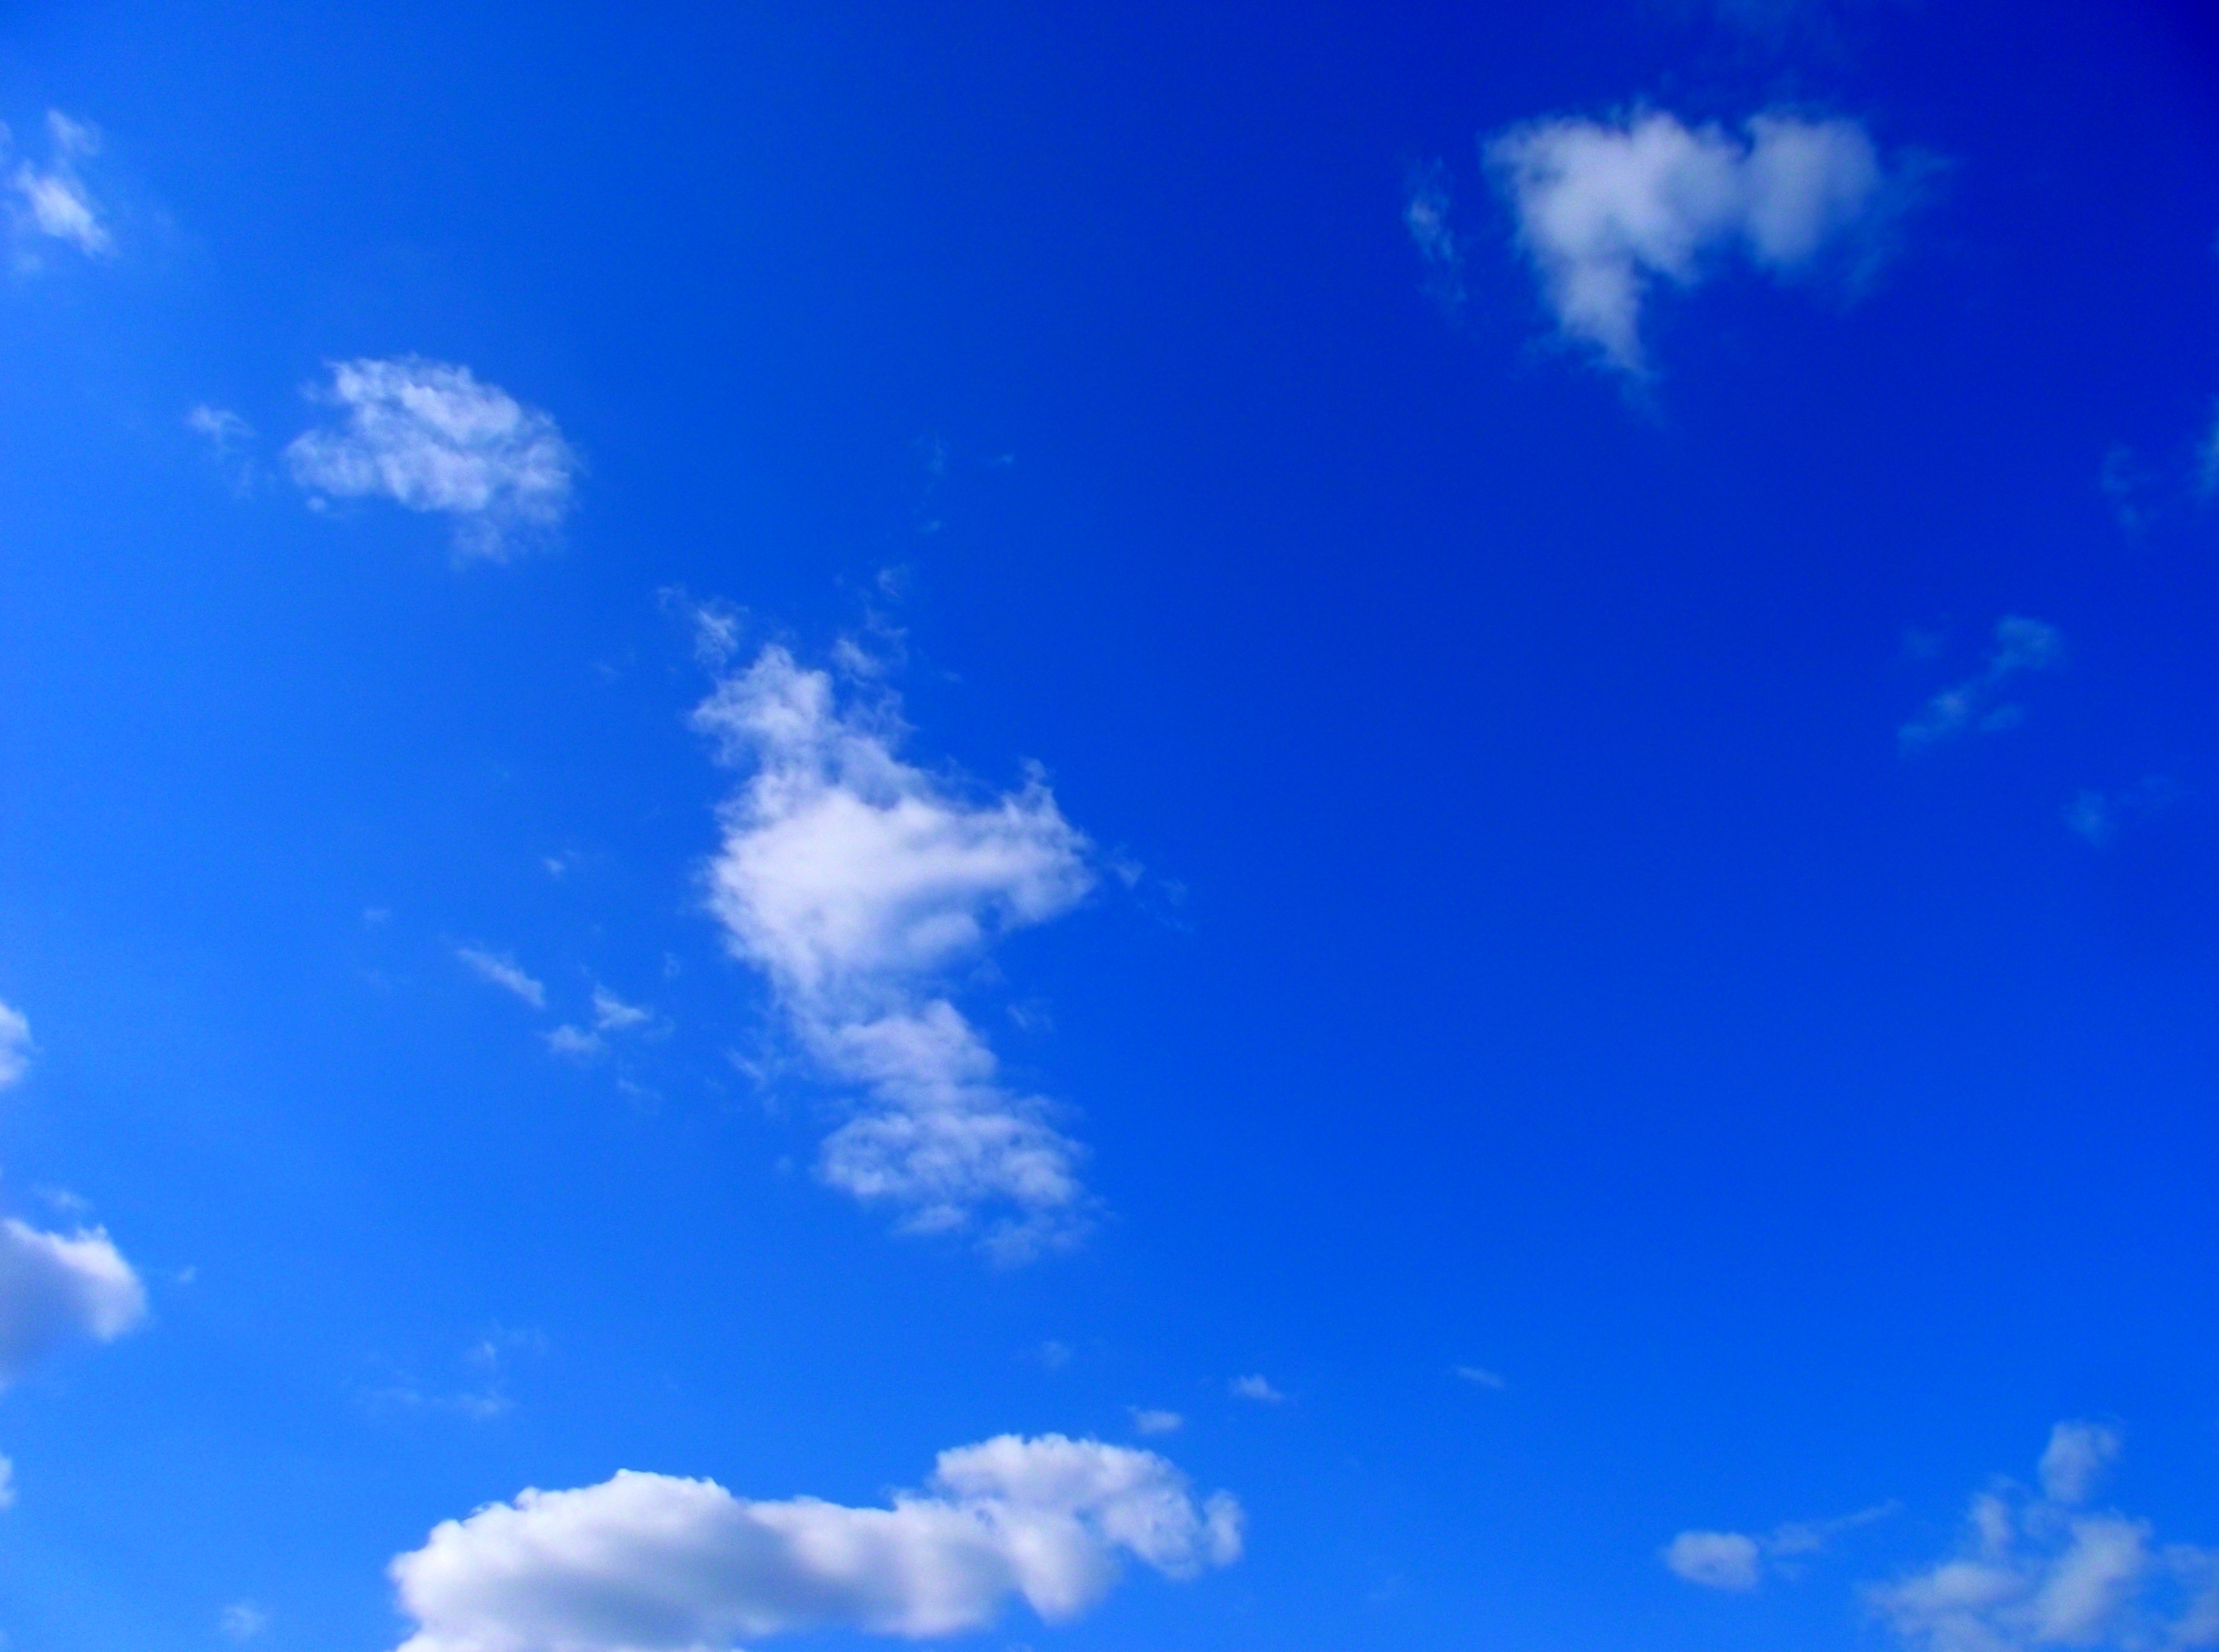 Photo of cumulus clouds at blue sky free image download